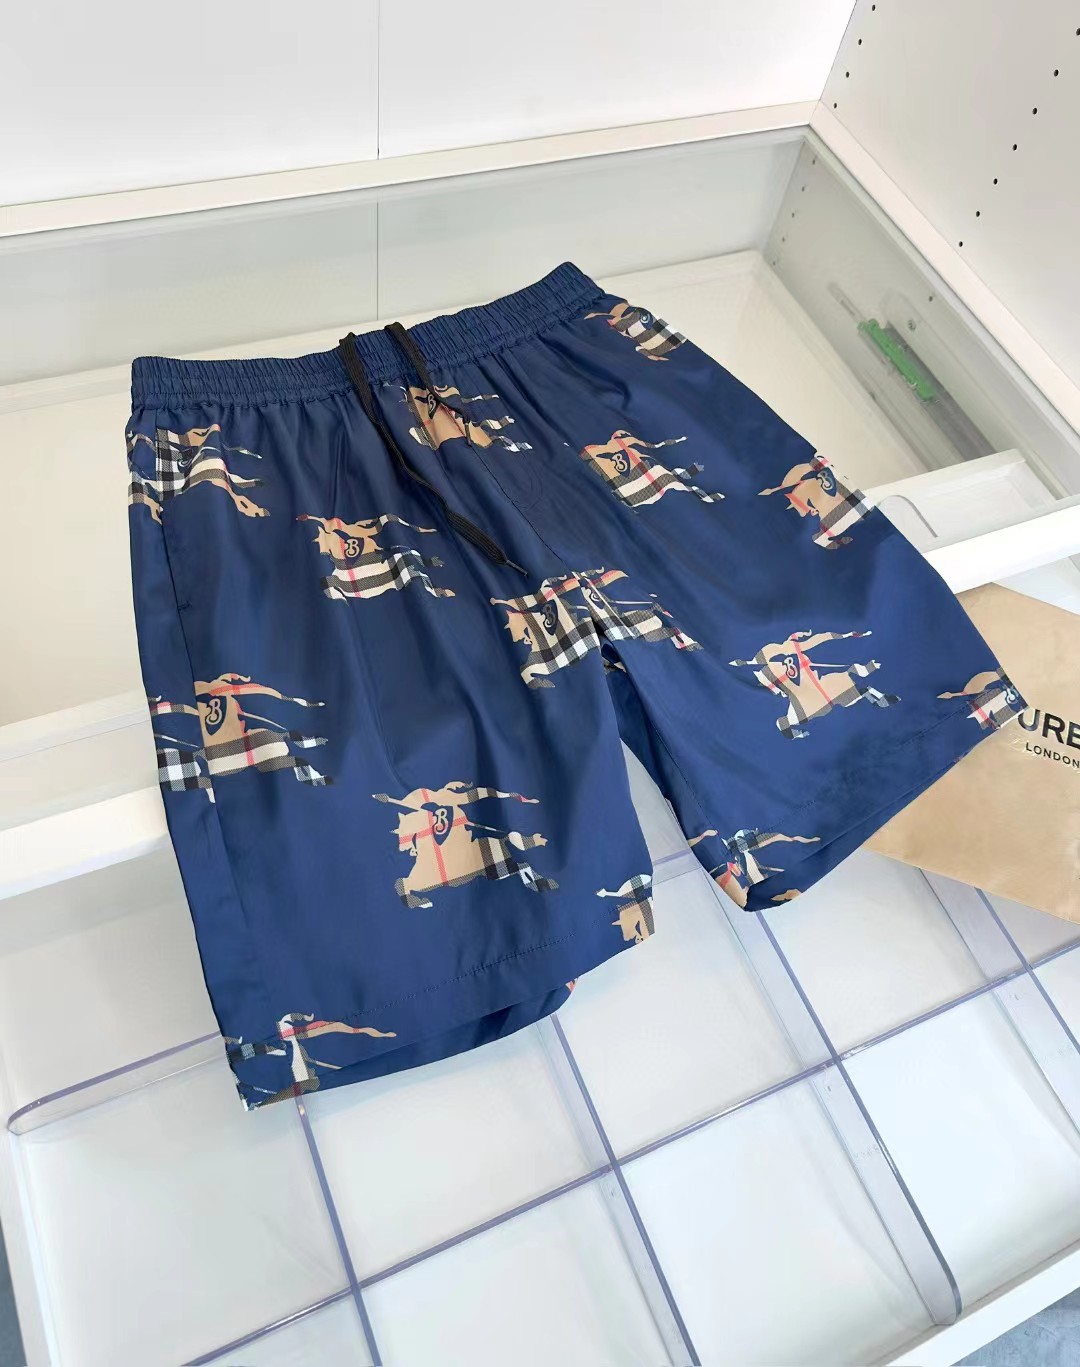 Burberry Clothing Shorts Black Blue Green Polyester Summer Collection Beach